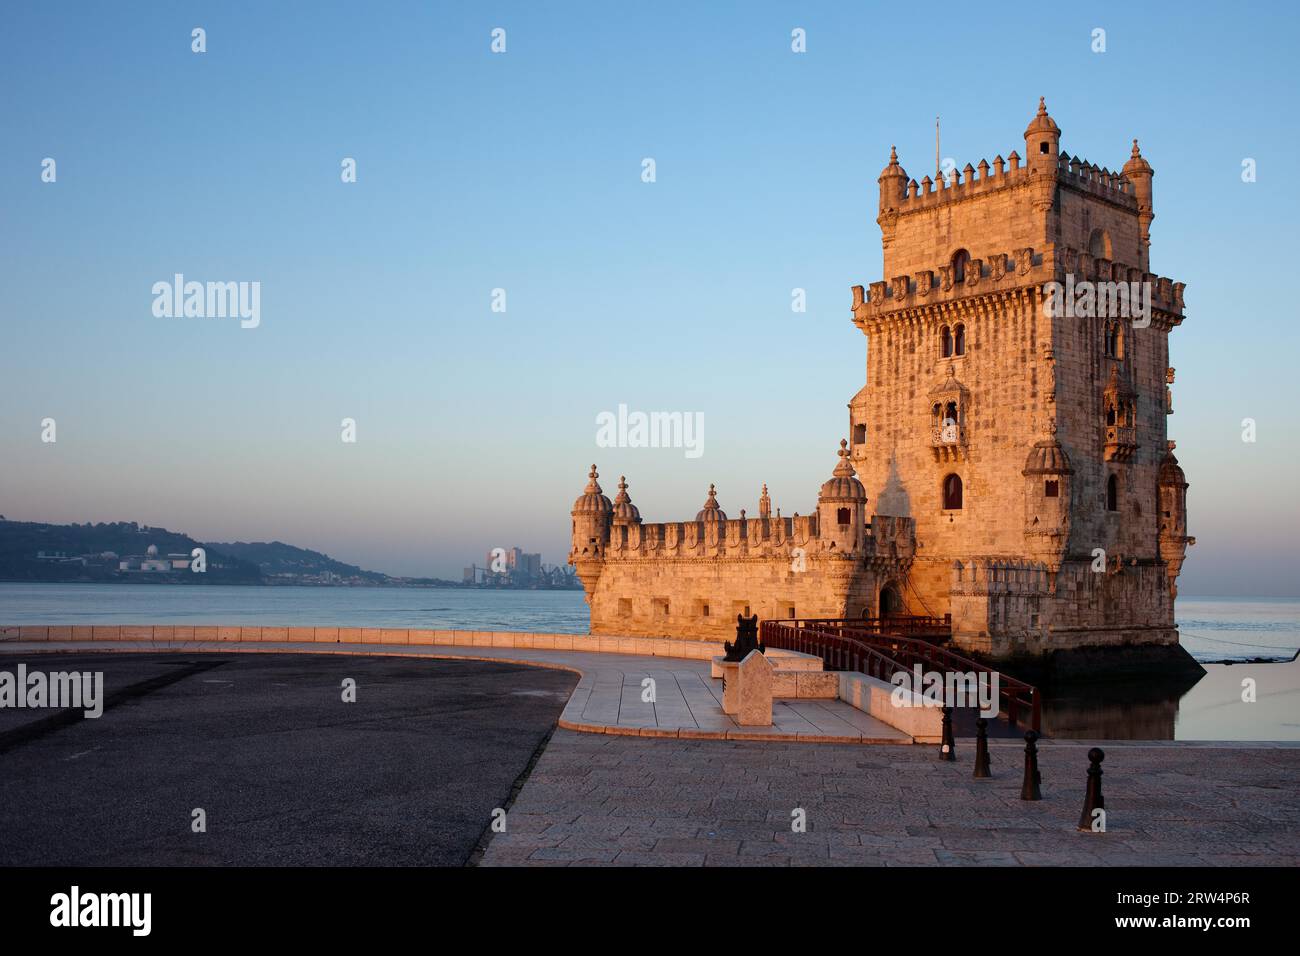 Belem Tower and promenade along the Tagus river at sunrise in Lisbon, Portugal Stock Photo